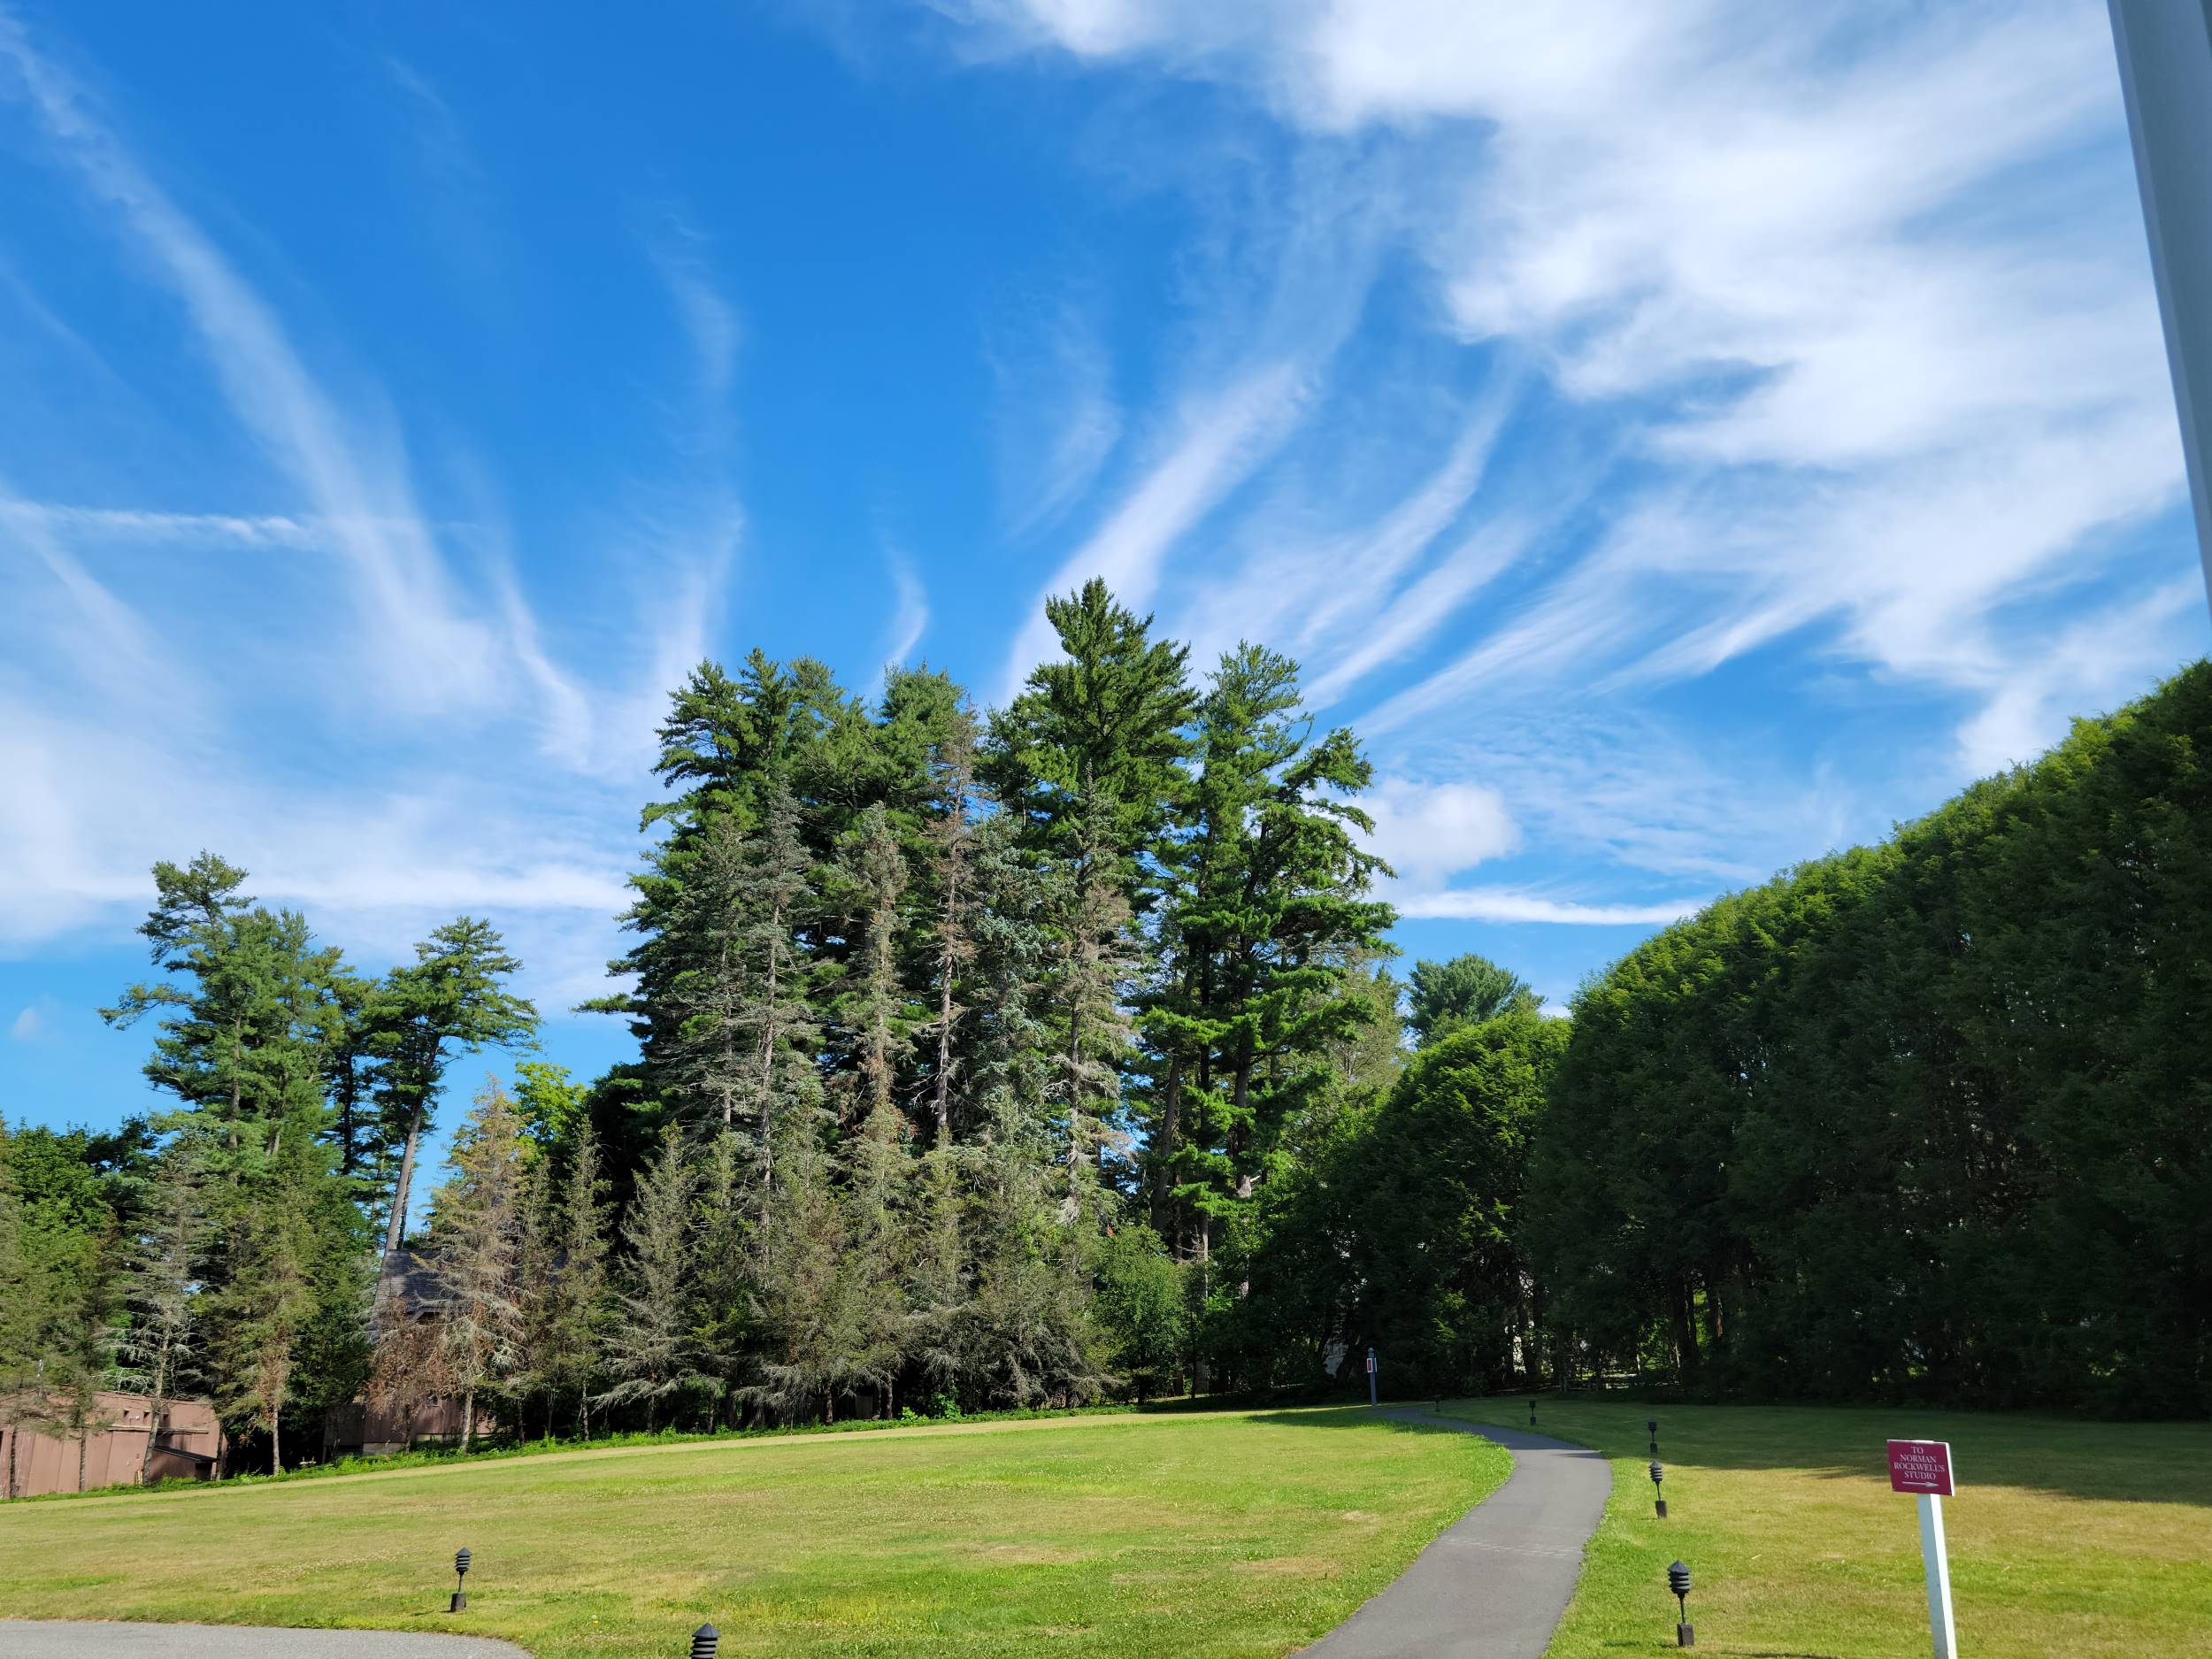 A field with medium and tall trees. The blue sky is streaked by clouds